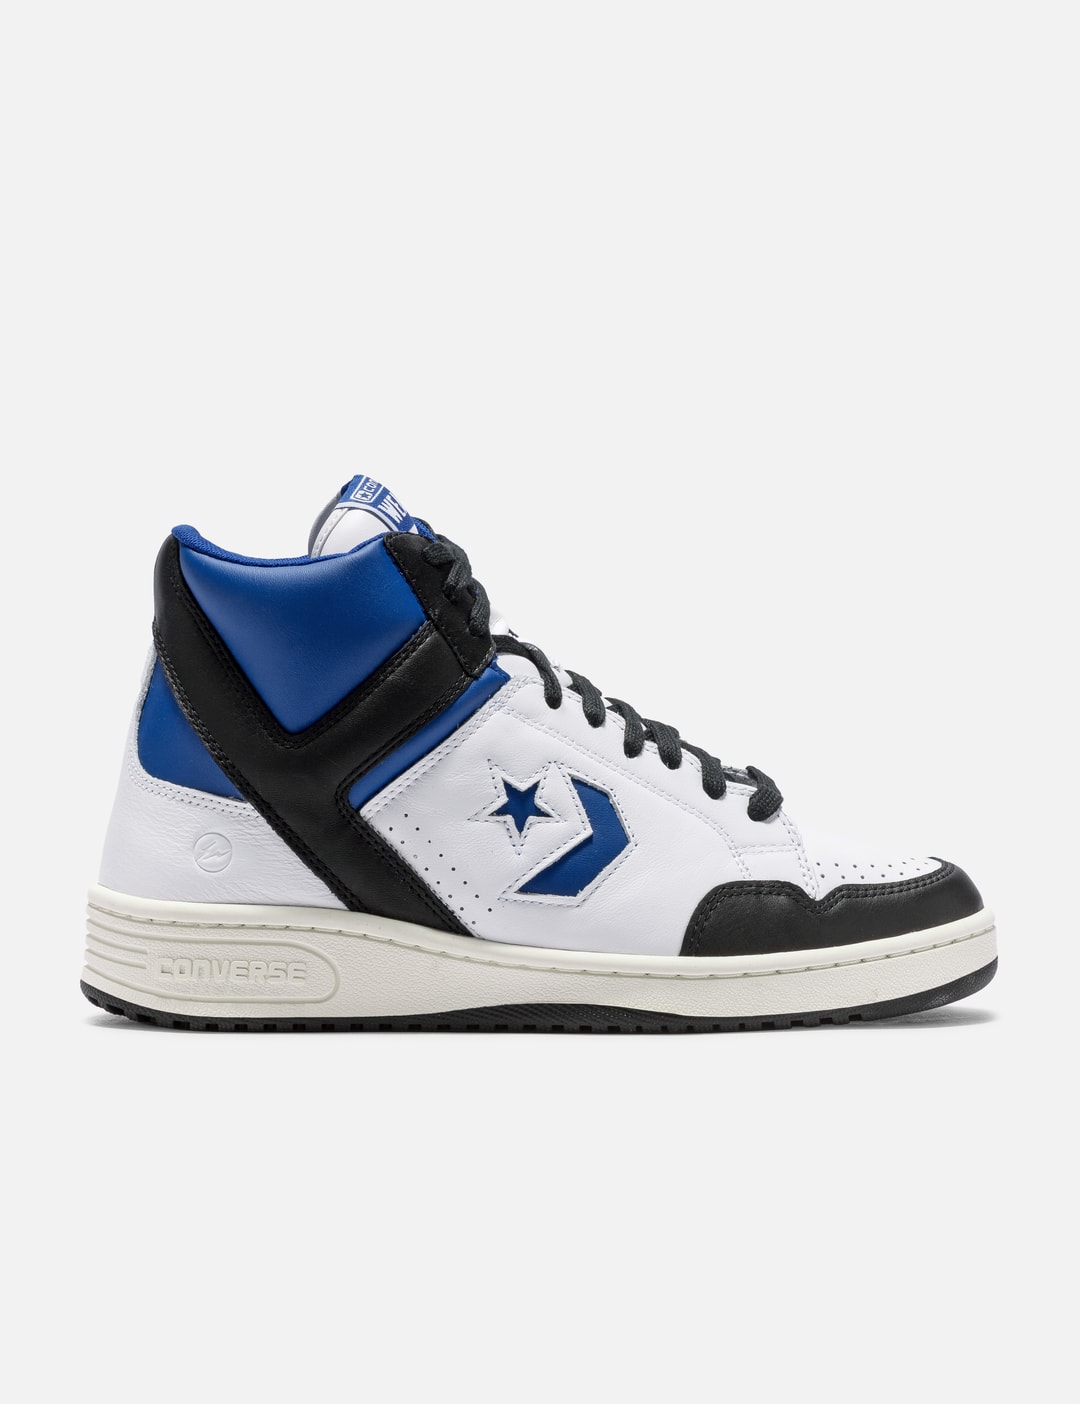 Converse - Converse x FRGMT Weapon High Top | HBX - Globally Curated ...